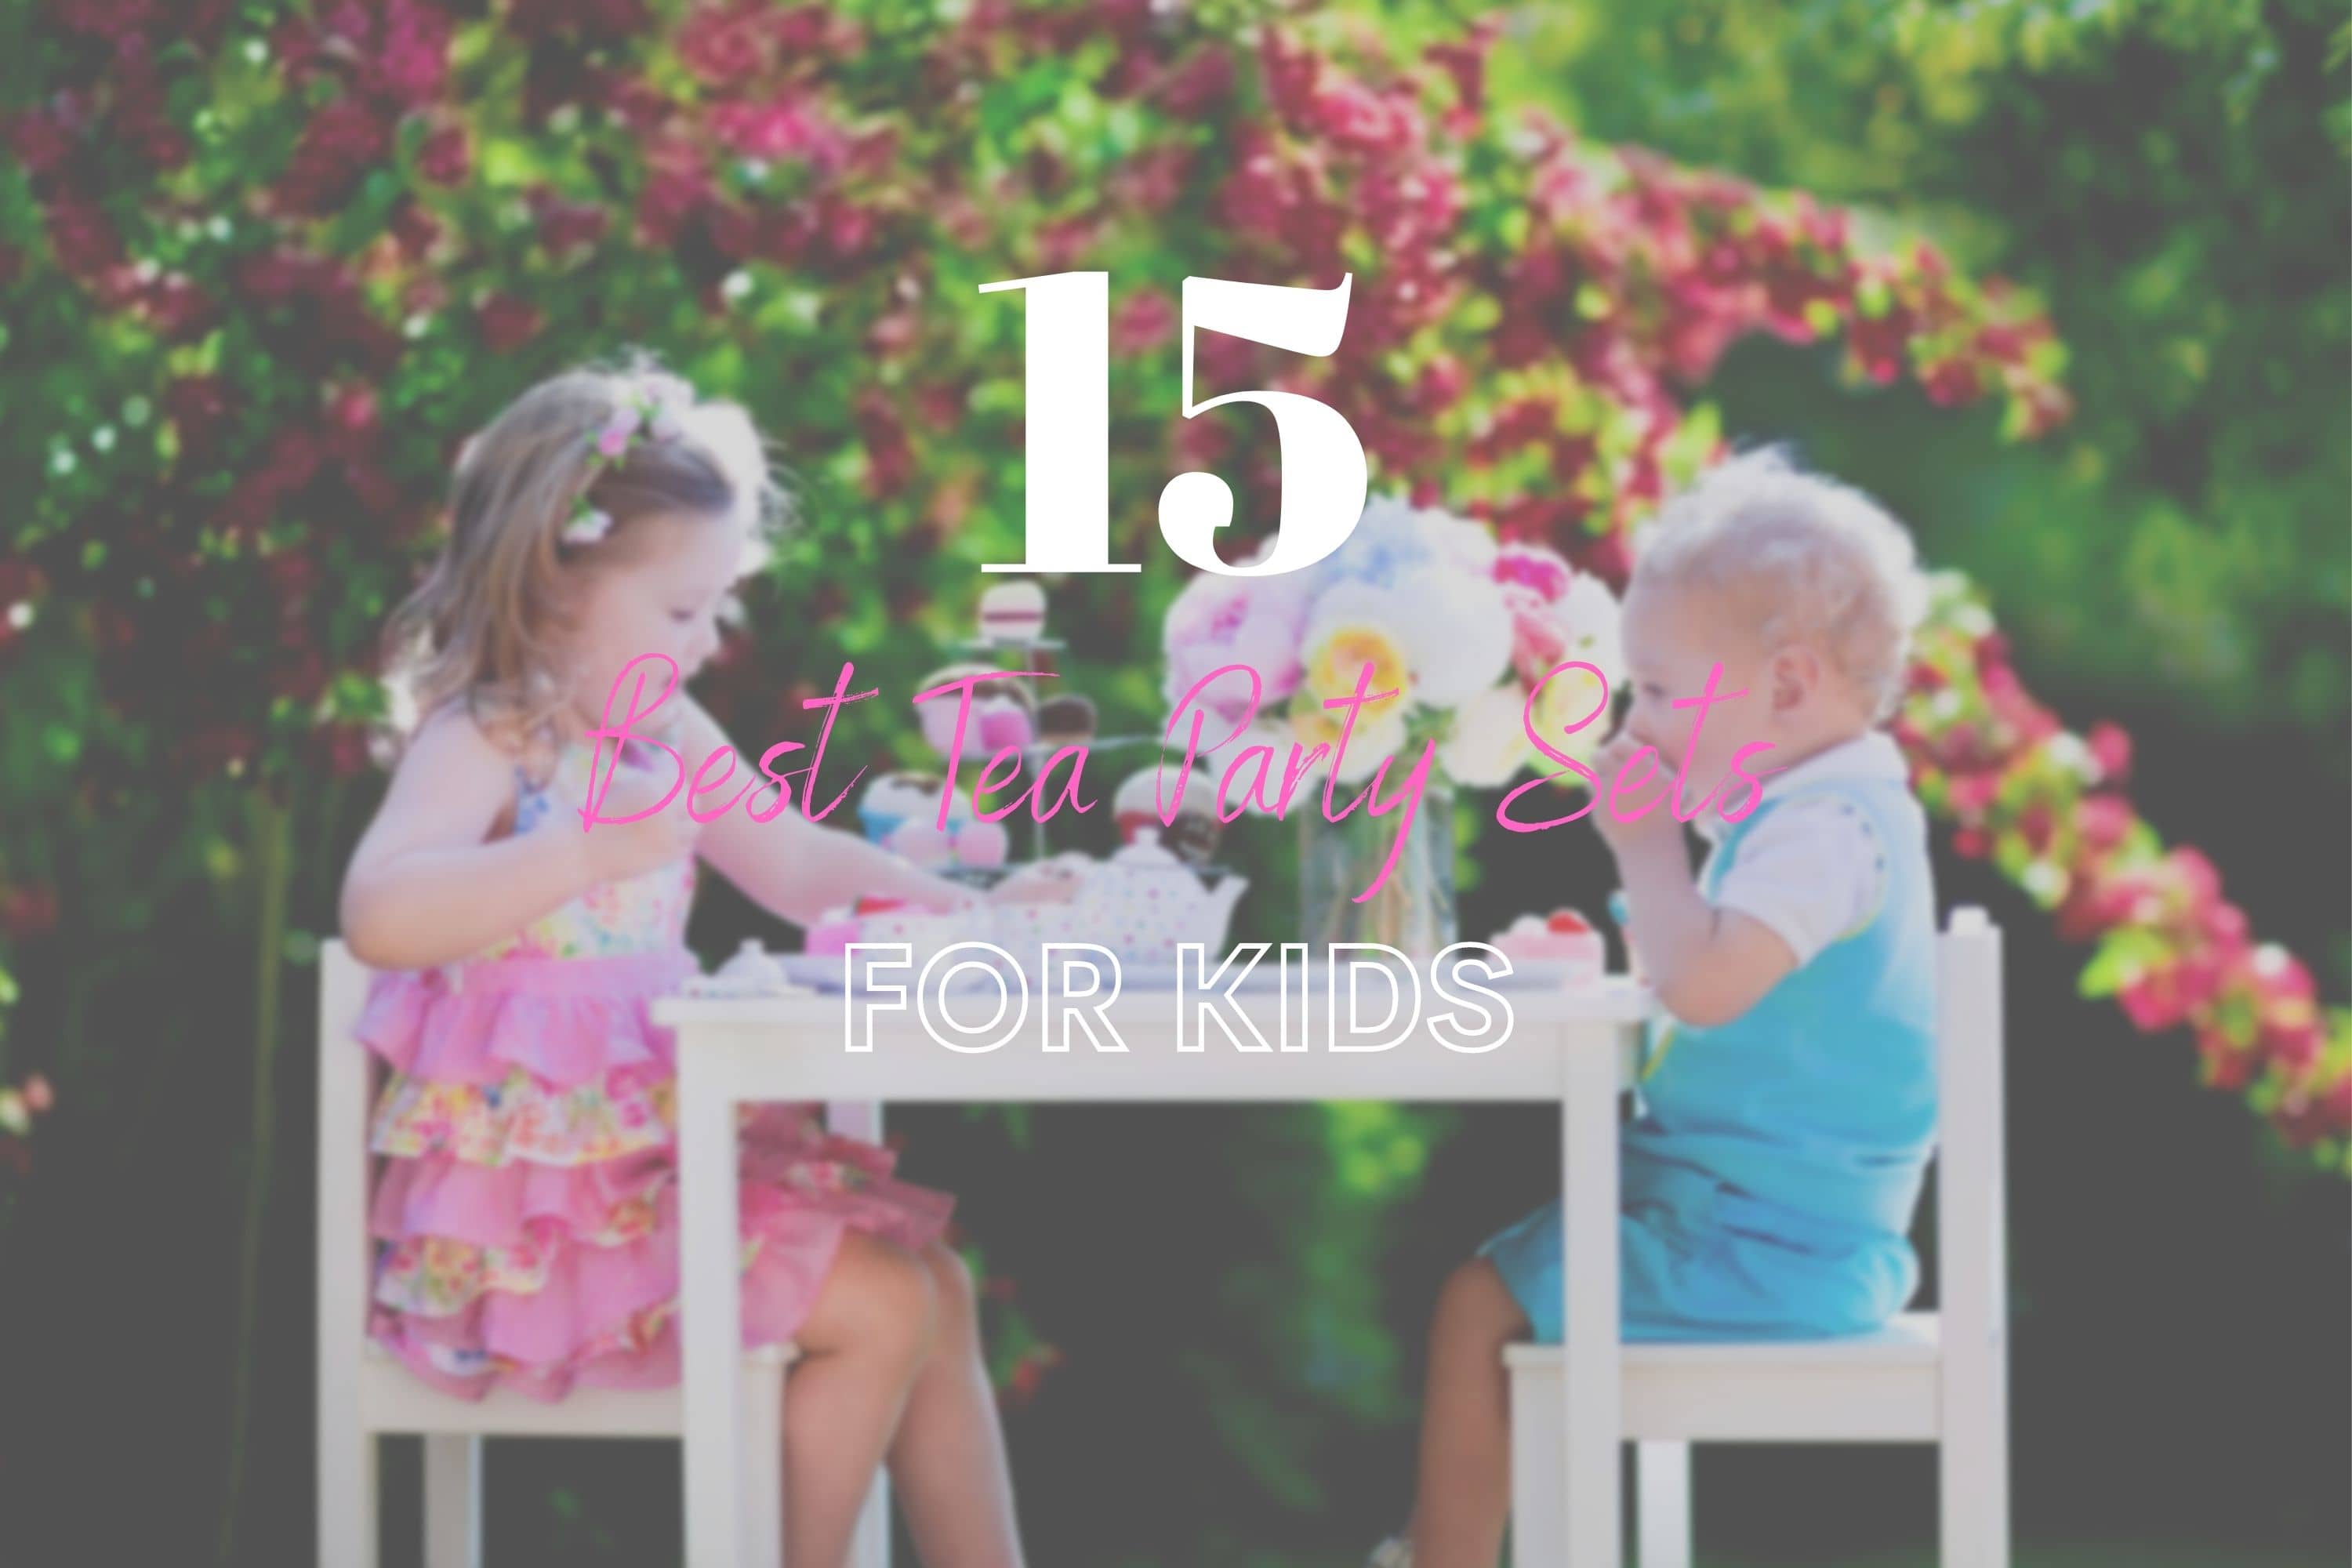 a little boy and a little girl sit across a table from each other in a garden with flowers in the background. The two are eating cakes and playing with a tea set. Text covers the image that says 15 best tea party sets for kids.